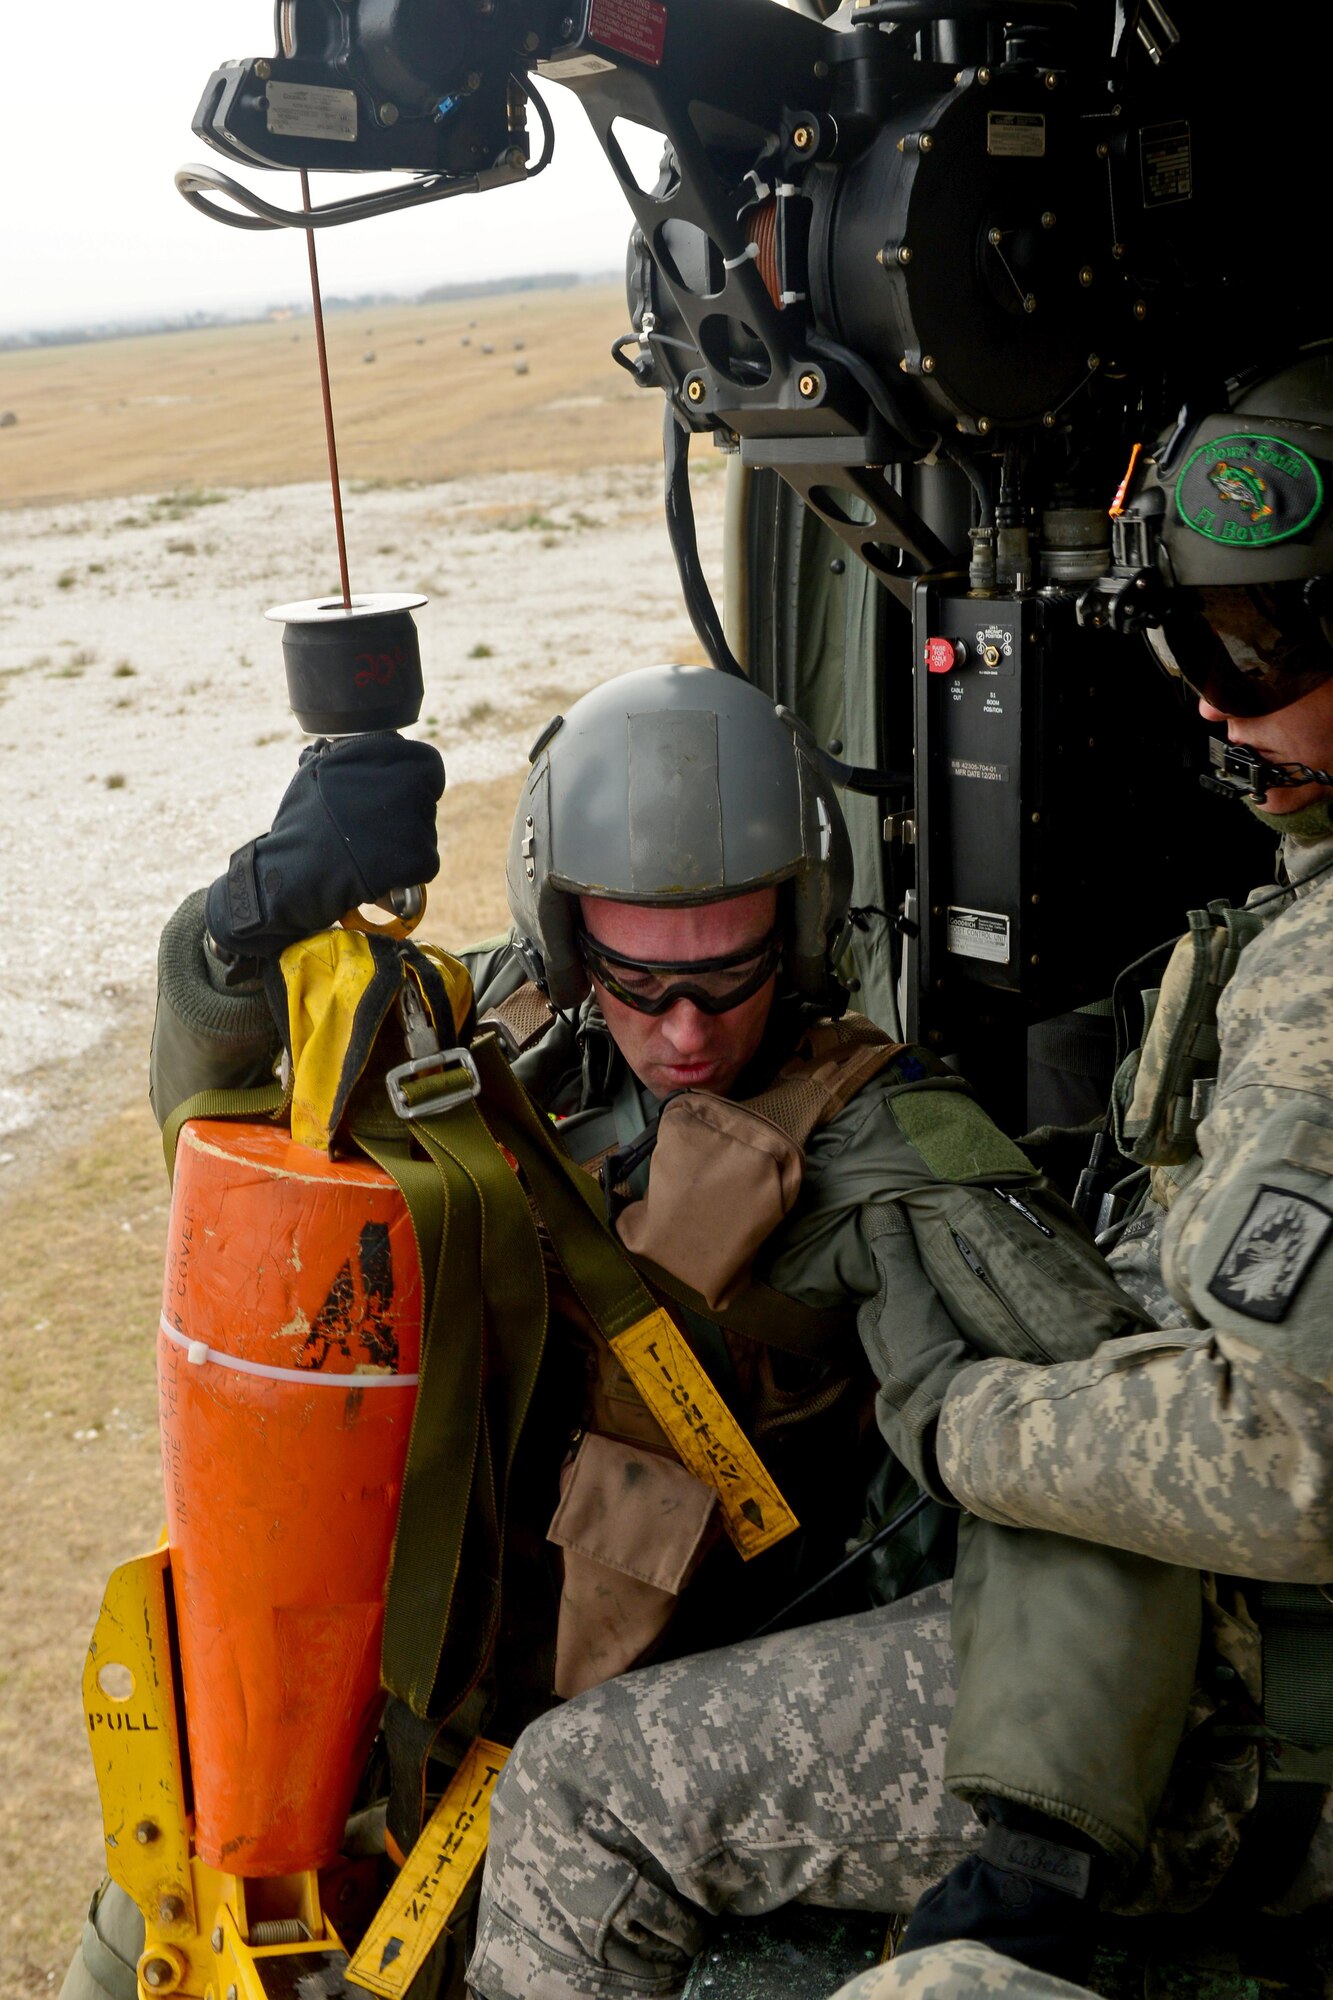 Lt. Col. Christopher Austin, (from left) is pulled onto a UH-60 Black Hawk helicopter by U.S. Army Sgt. Keith Dishman, 12th Combat Aviation Brigade crew chief during a joint-service combat search and rescue training mission, Jan. 28, 2014 at Cellina Meduna, Italy. After successfully evading opposing forces and communicating with assets in the air, isolated Airmen were extracted from “hostile” areas by the 12th CAB. (U.S. Air Force photo/Senior Airman Briana Jones) 

